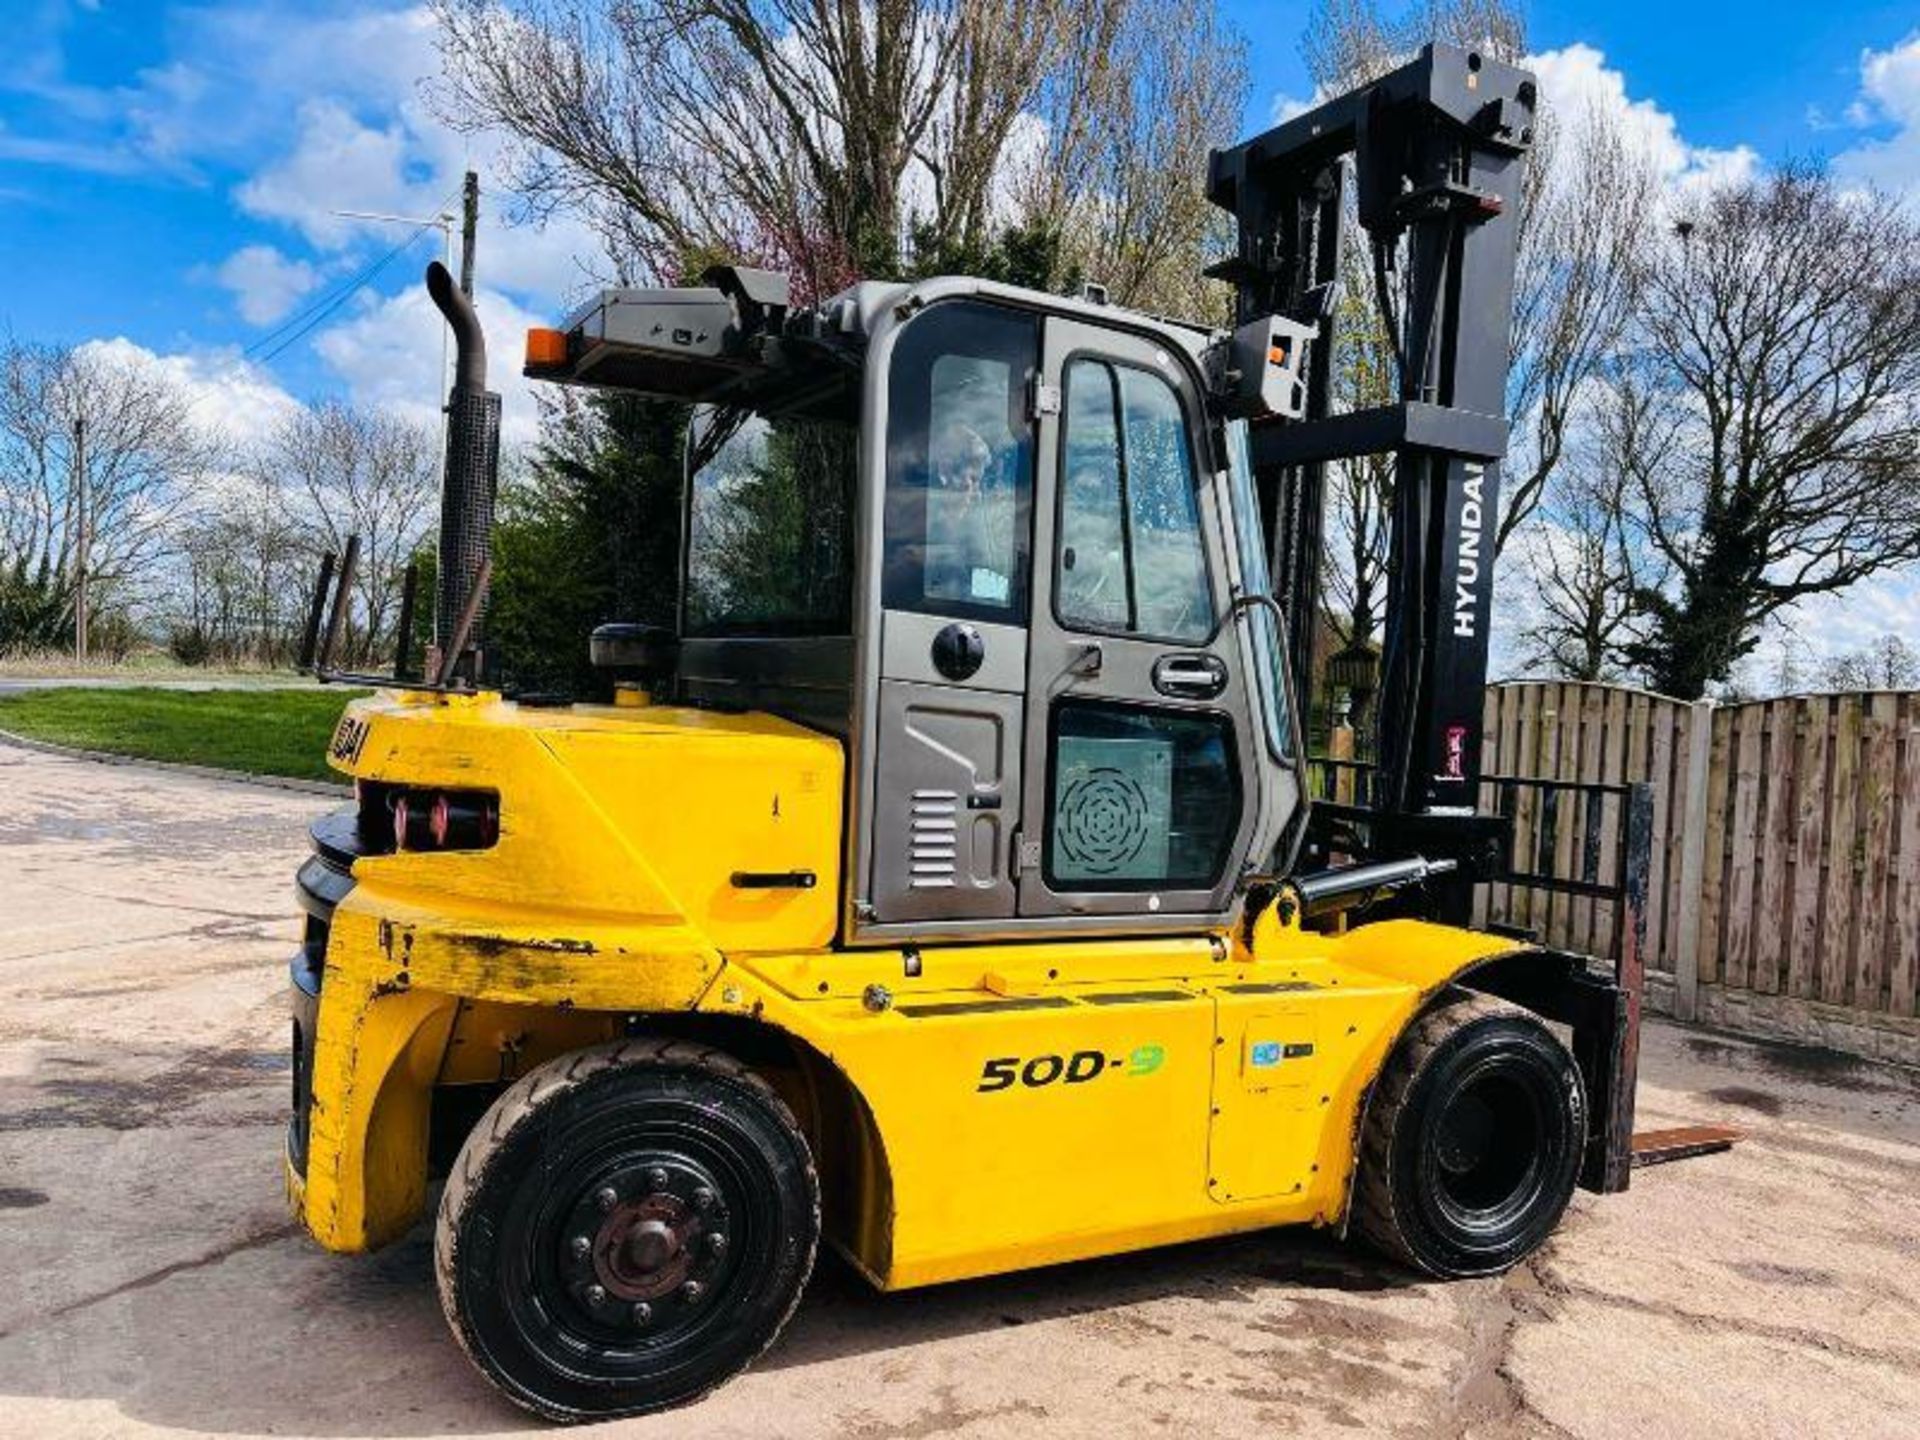 HYUNDAI 50D-9 DIESEL FORKLIFT *YEAR 2016, 5 TON LIFT* C/W SIDE SHIFT - Image 13 of 19